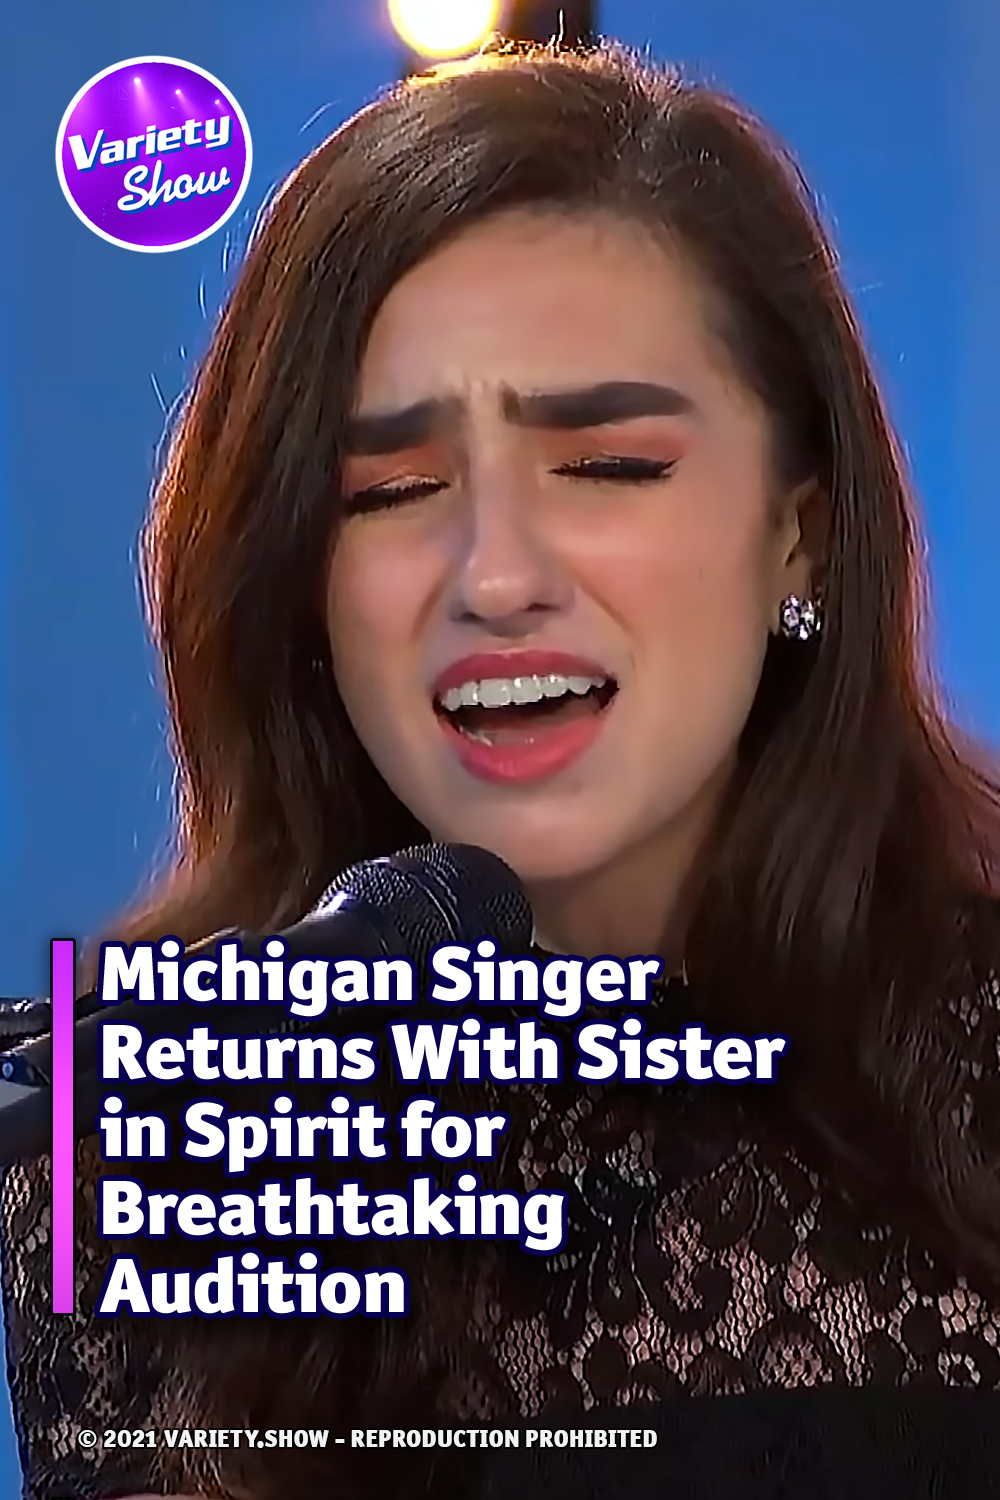 Michigan Singer Returns With Sister in Spirit for Breathtaking Audition